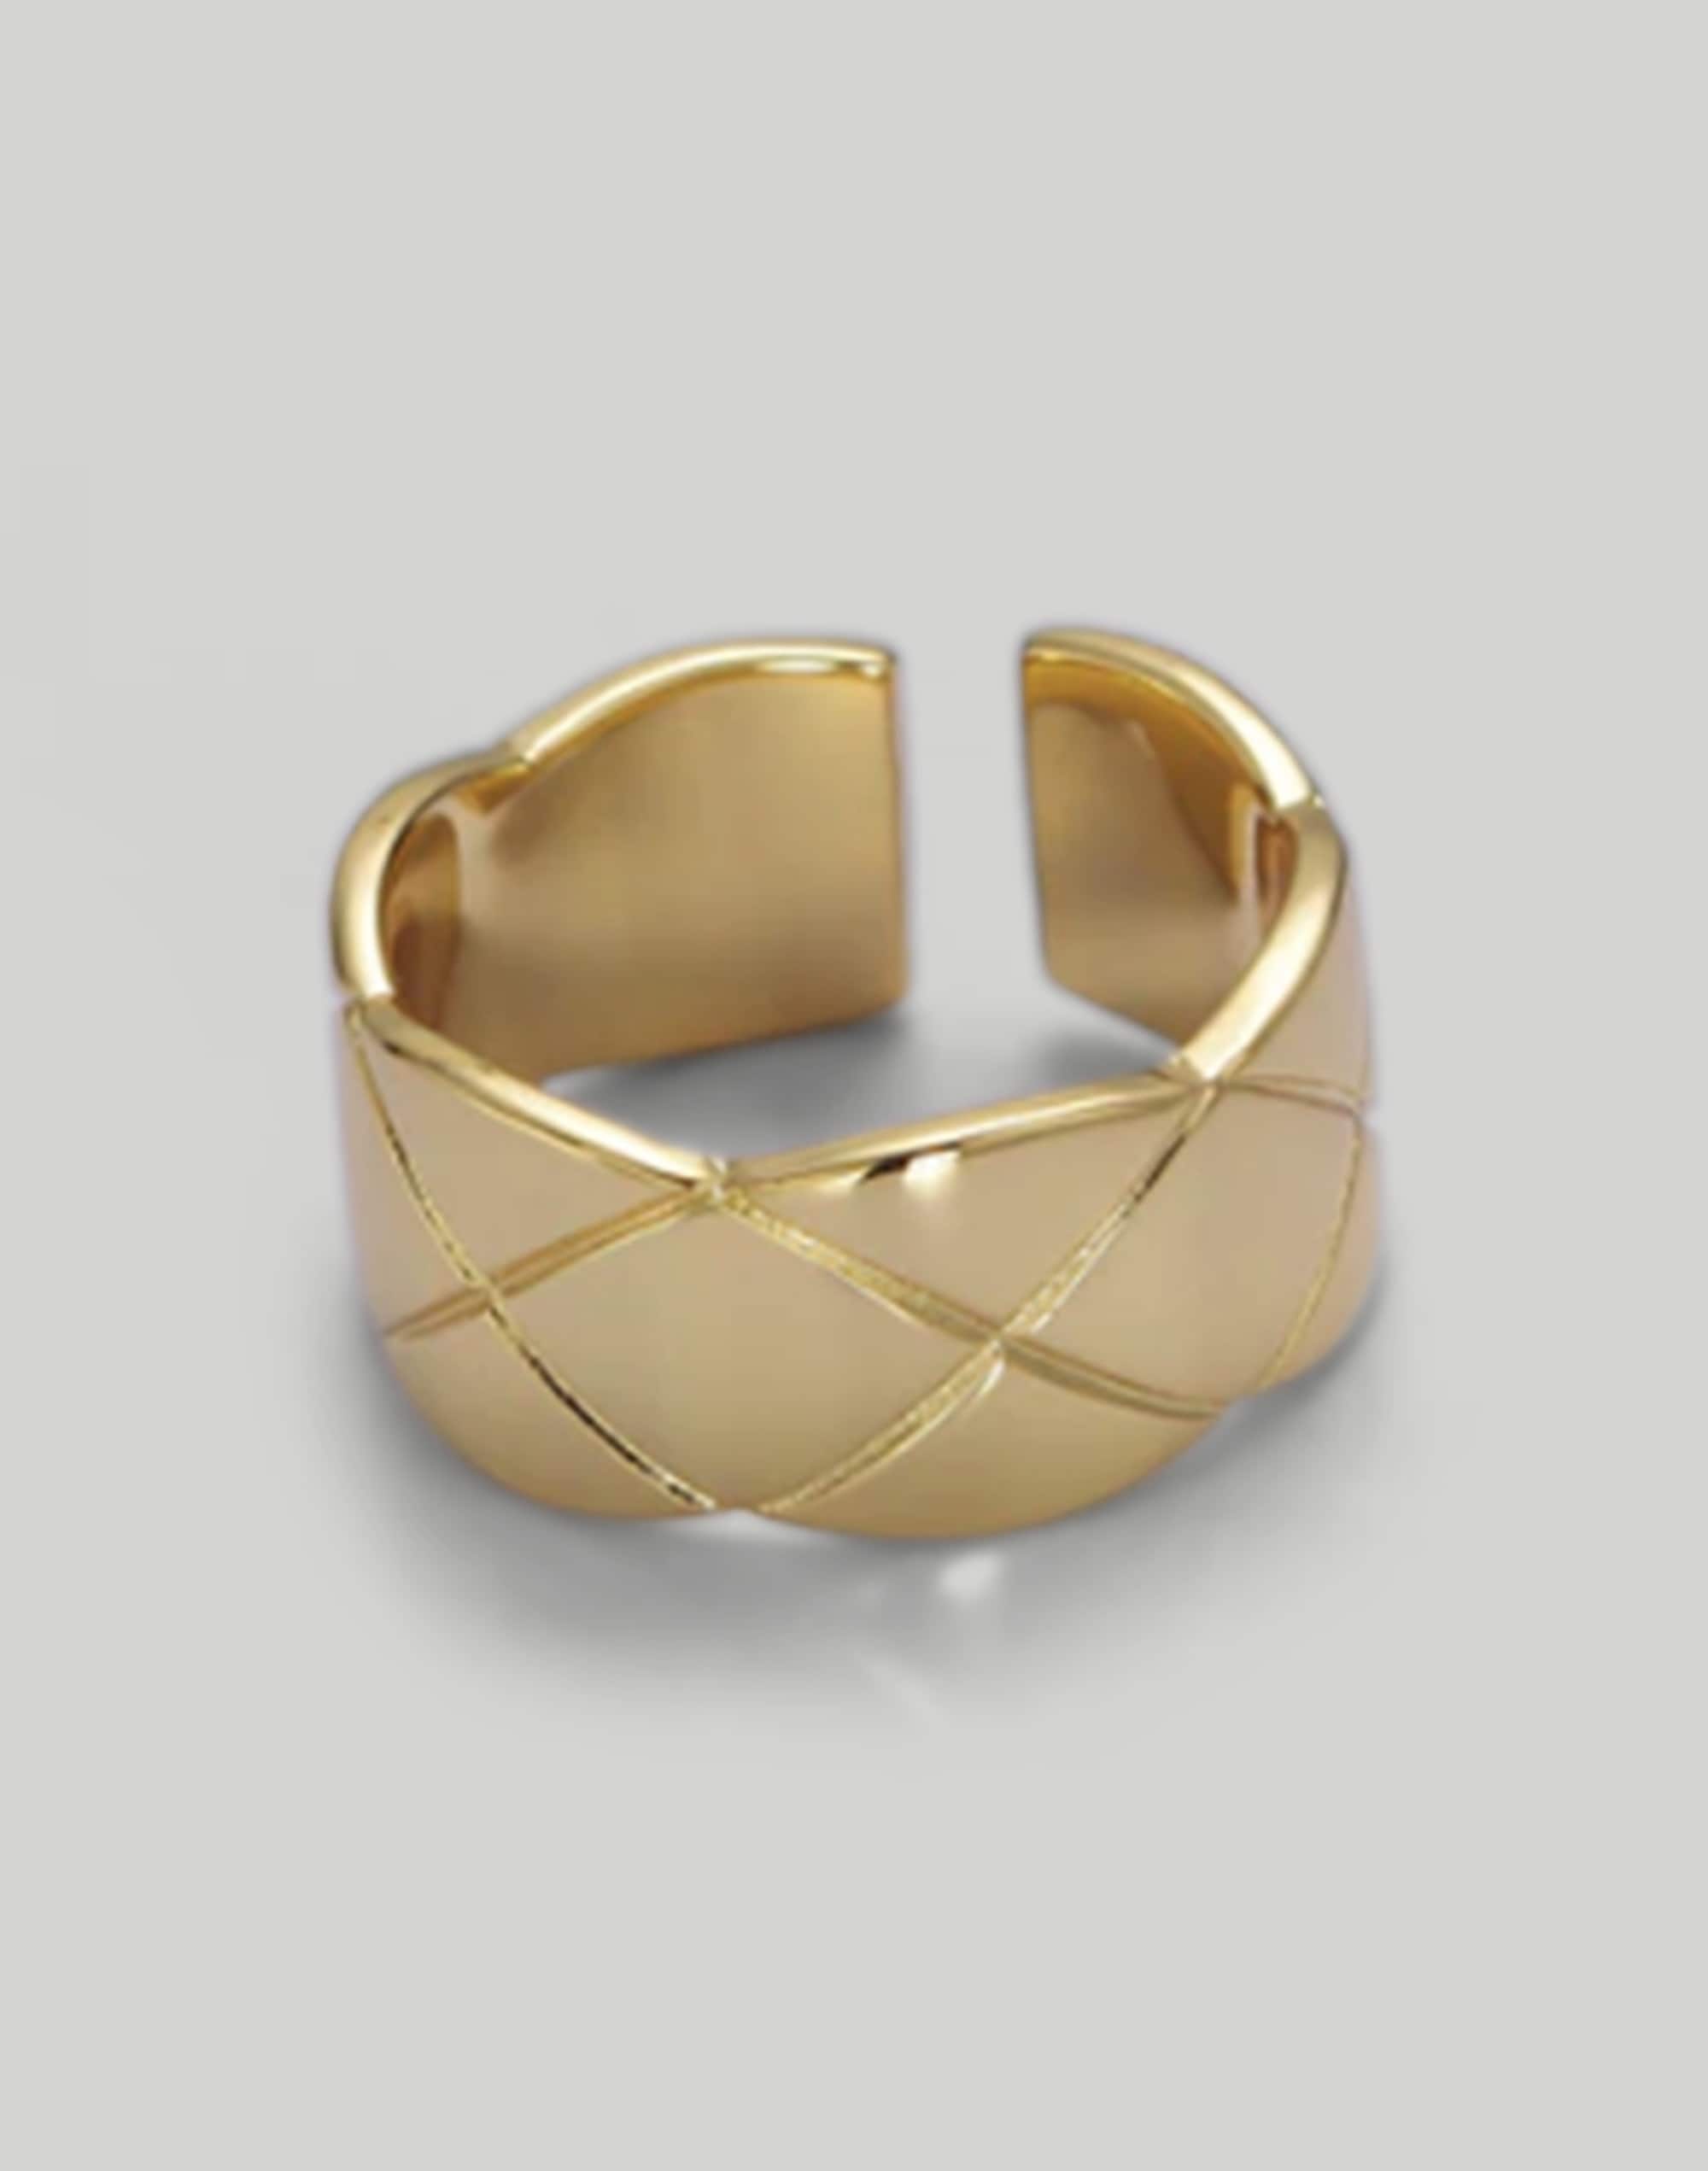 Abcrete & Co. The Checkered Statement Ring